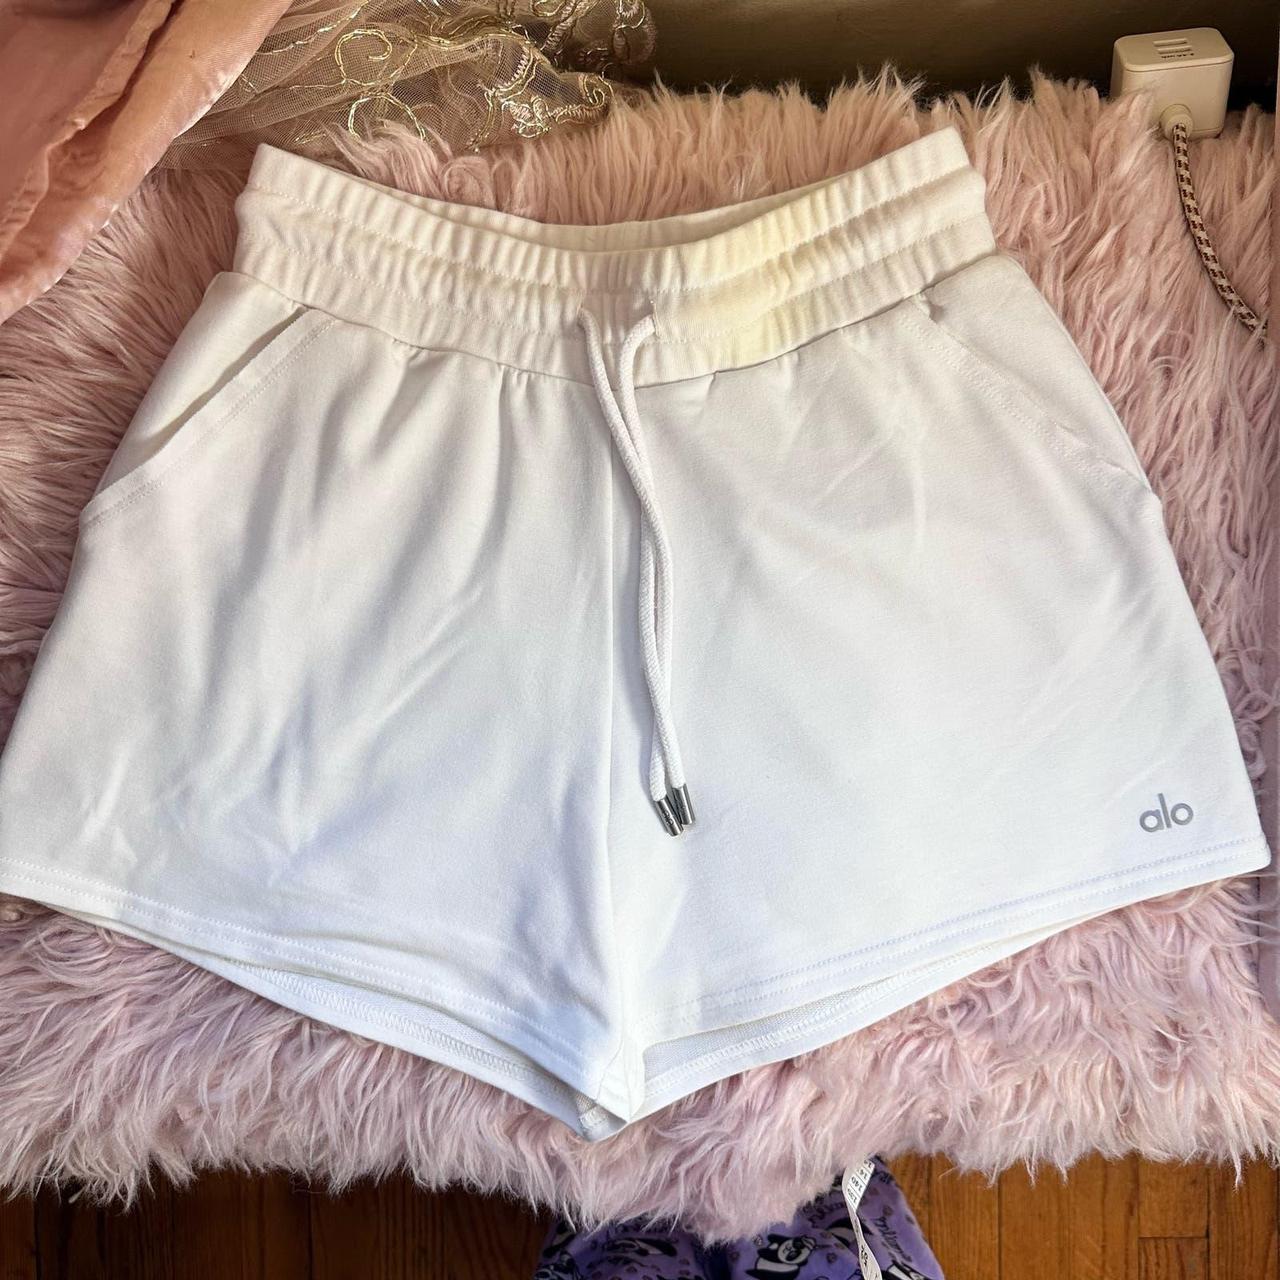 Alo Yoga Dreamy Short White Size XS , Has a stain on